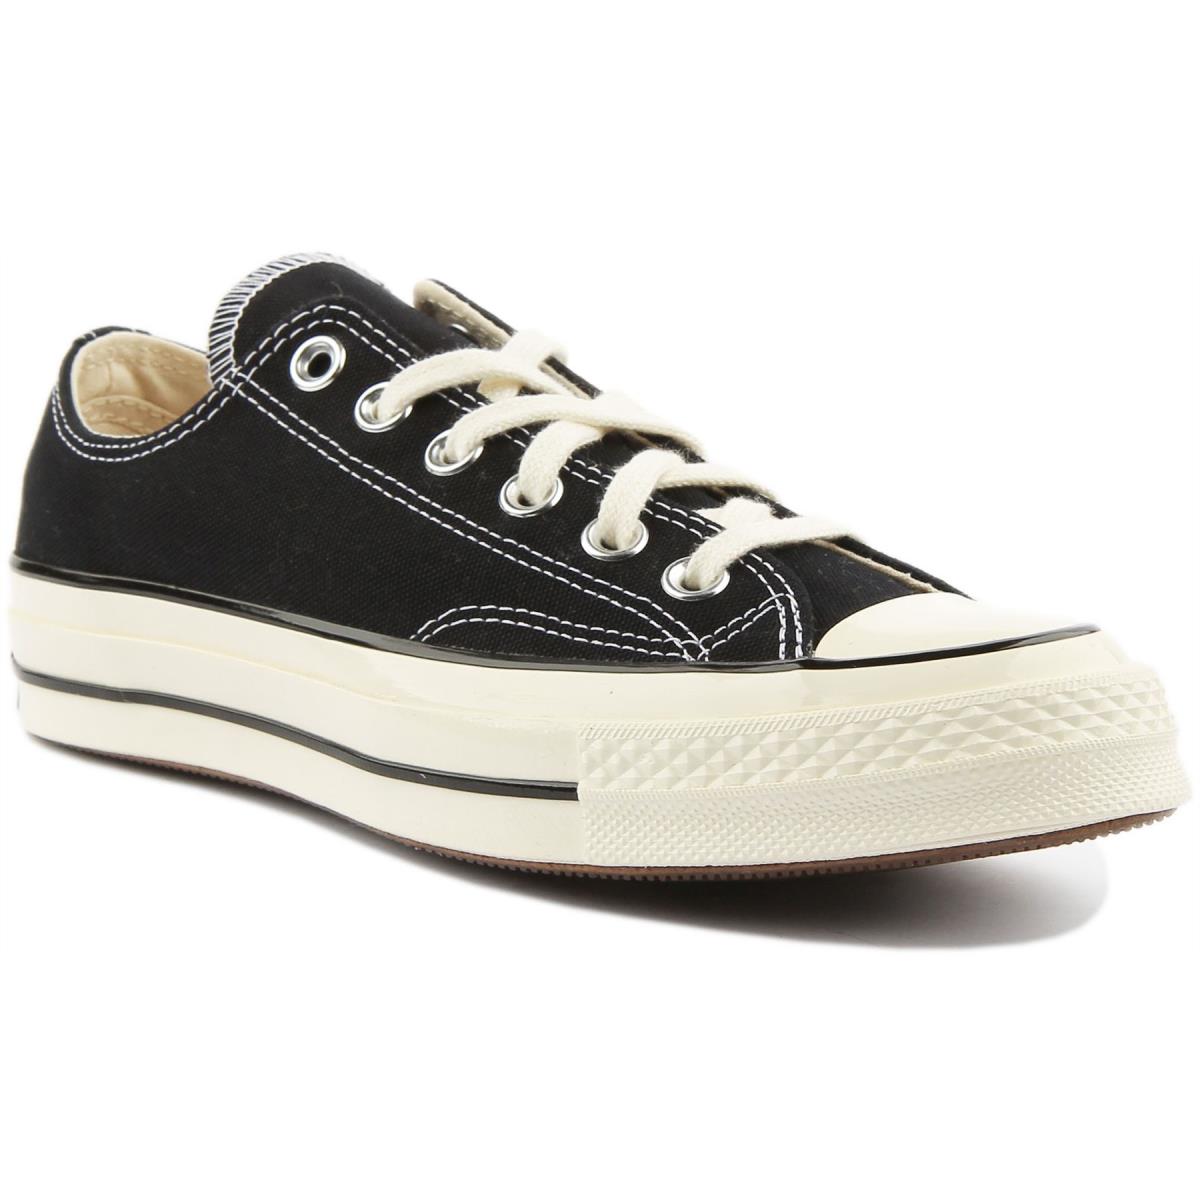 Converse 162058 Chuck 70s Ox Unisex Canvas Low Sneakers In Black Size US 3 - 12 BLACK